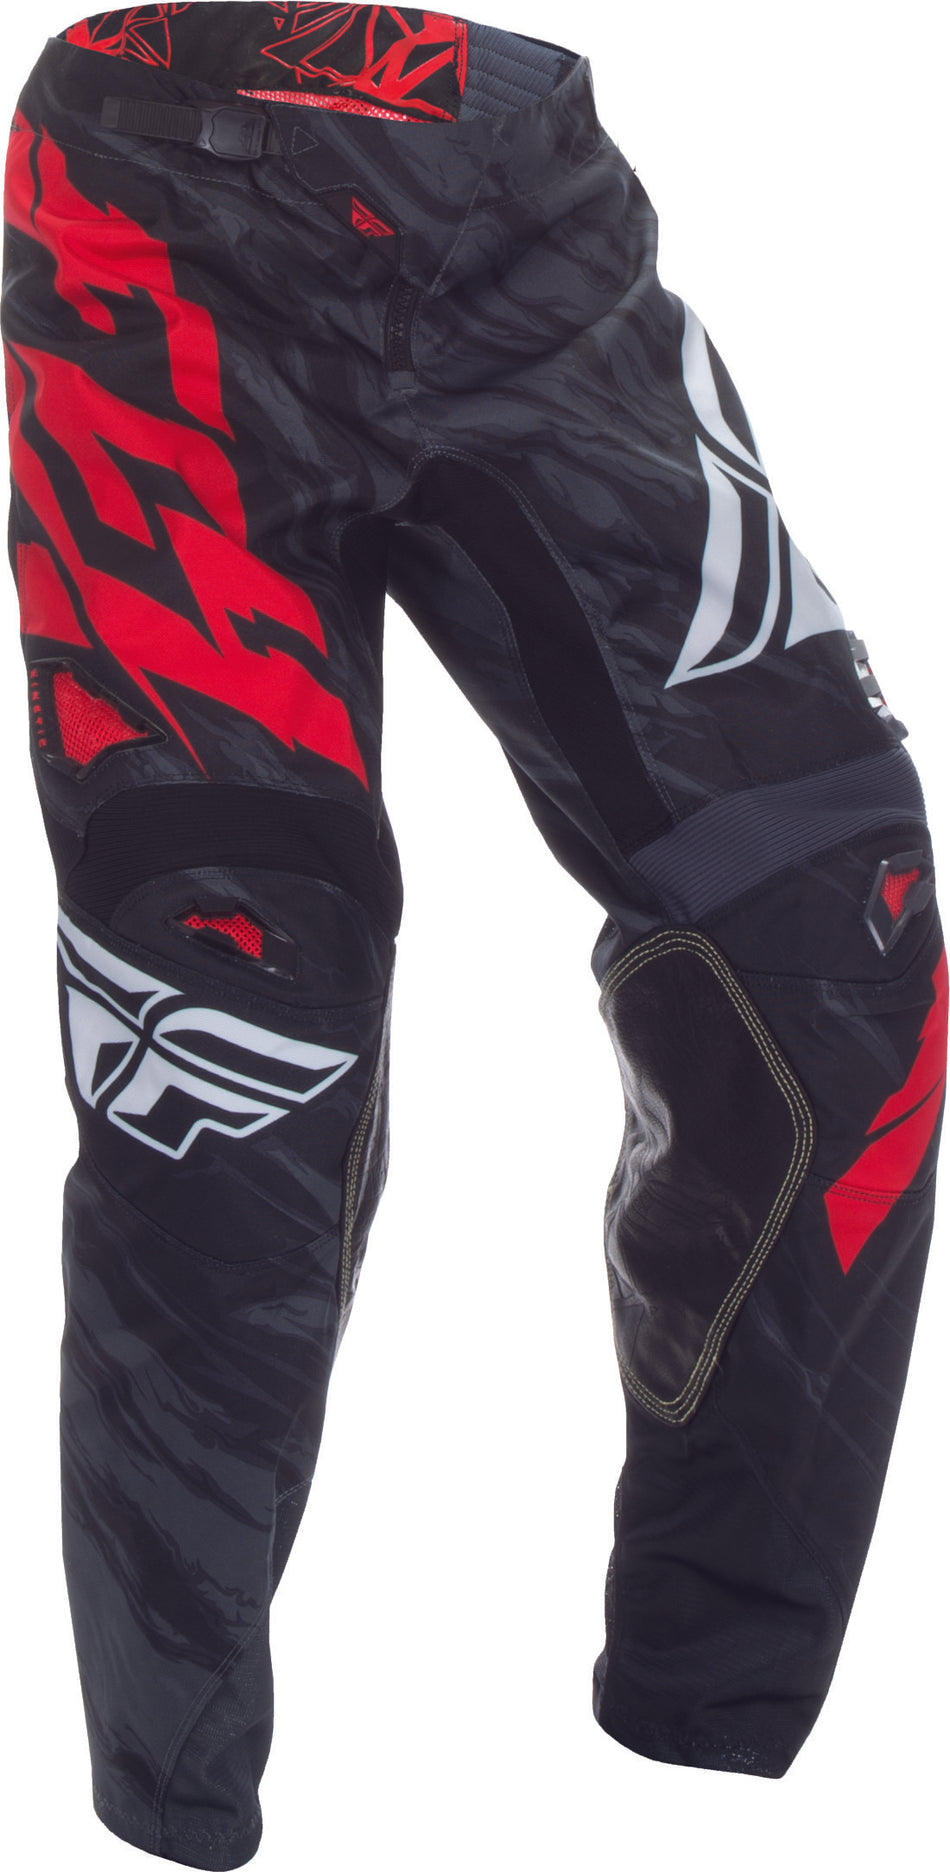 FLY RACING Kinetic Relapse Pant Black/Red Sz 34 370-43034